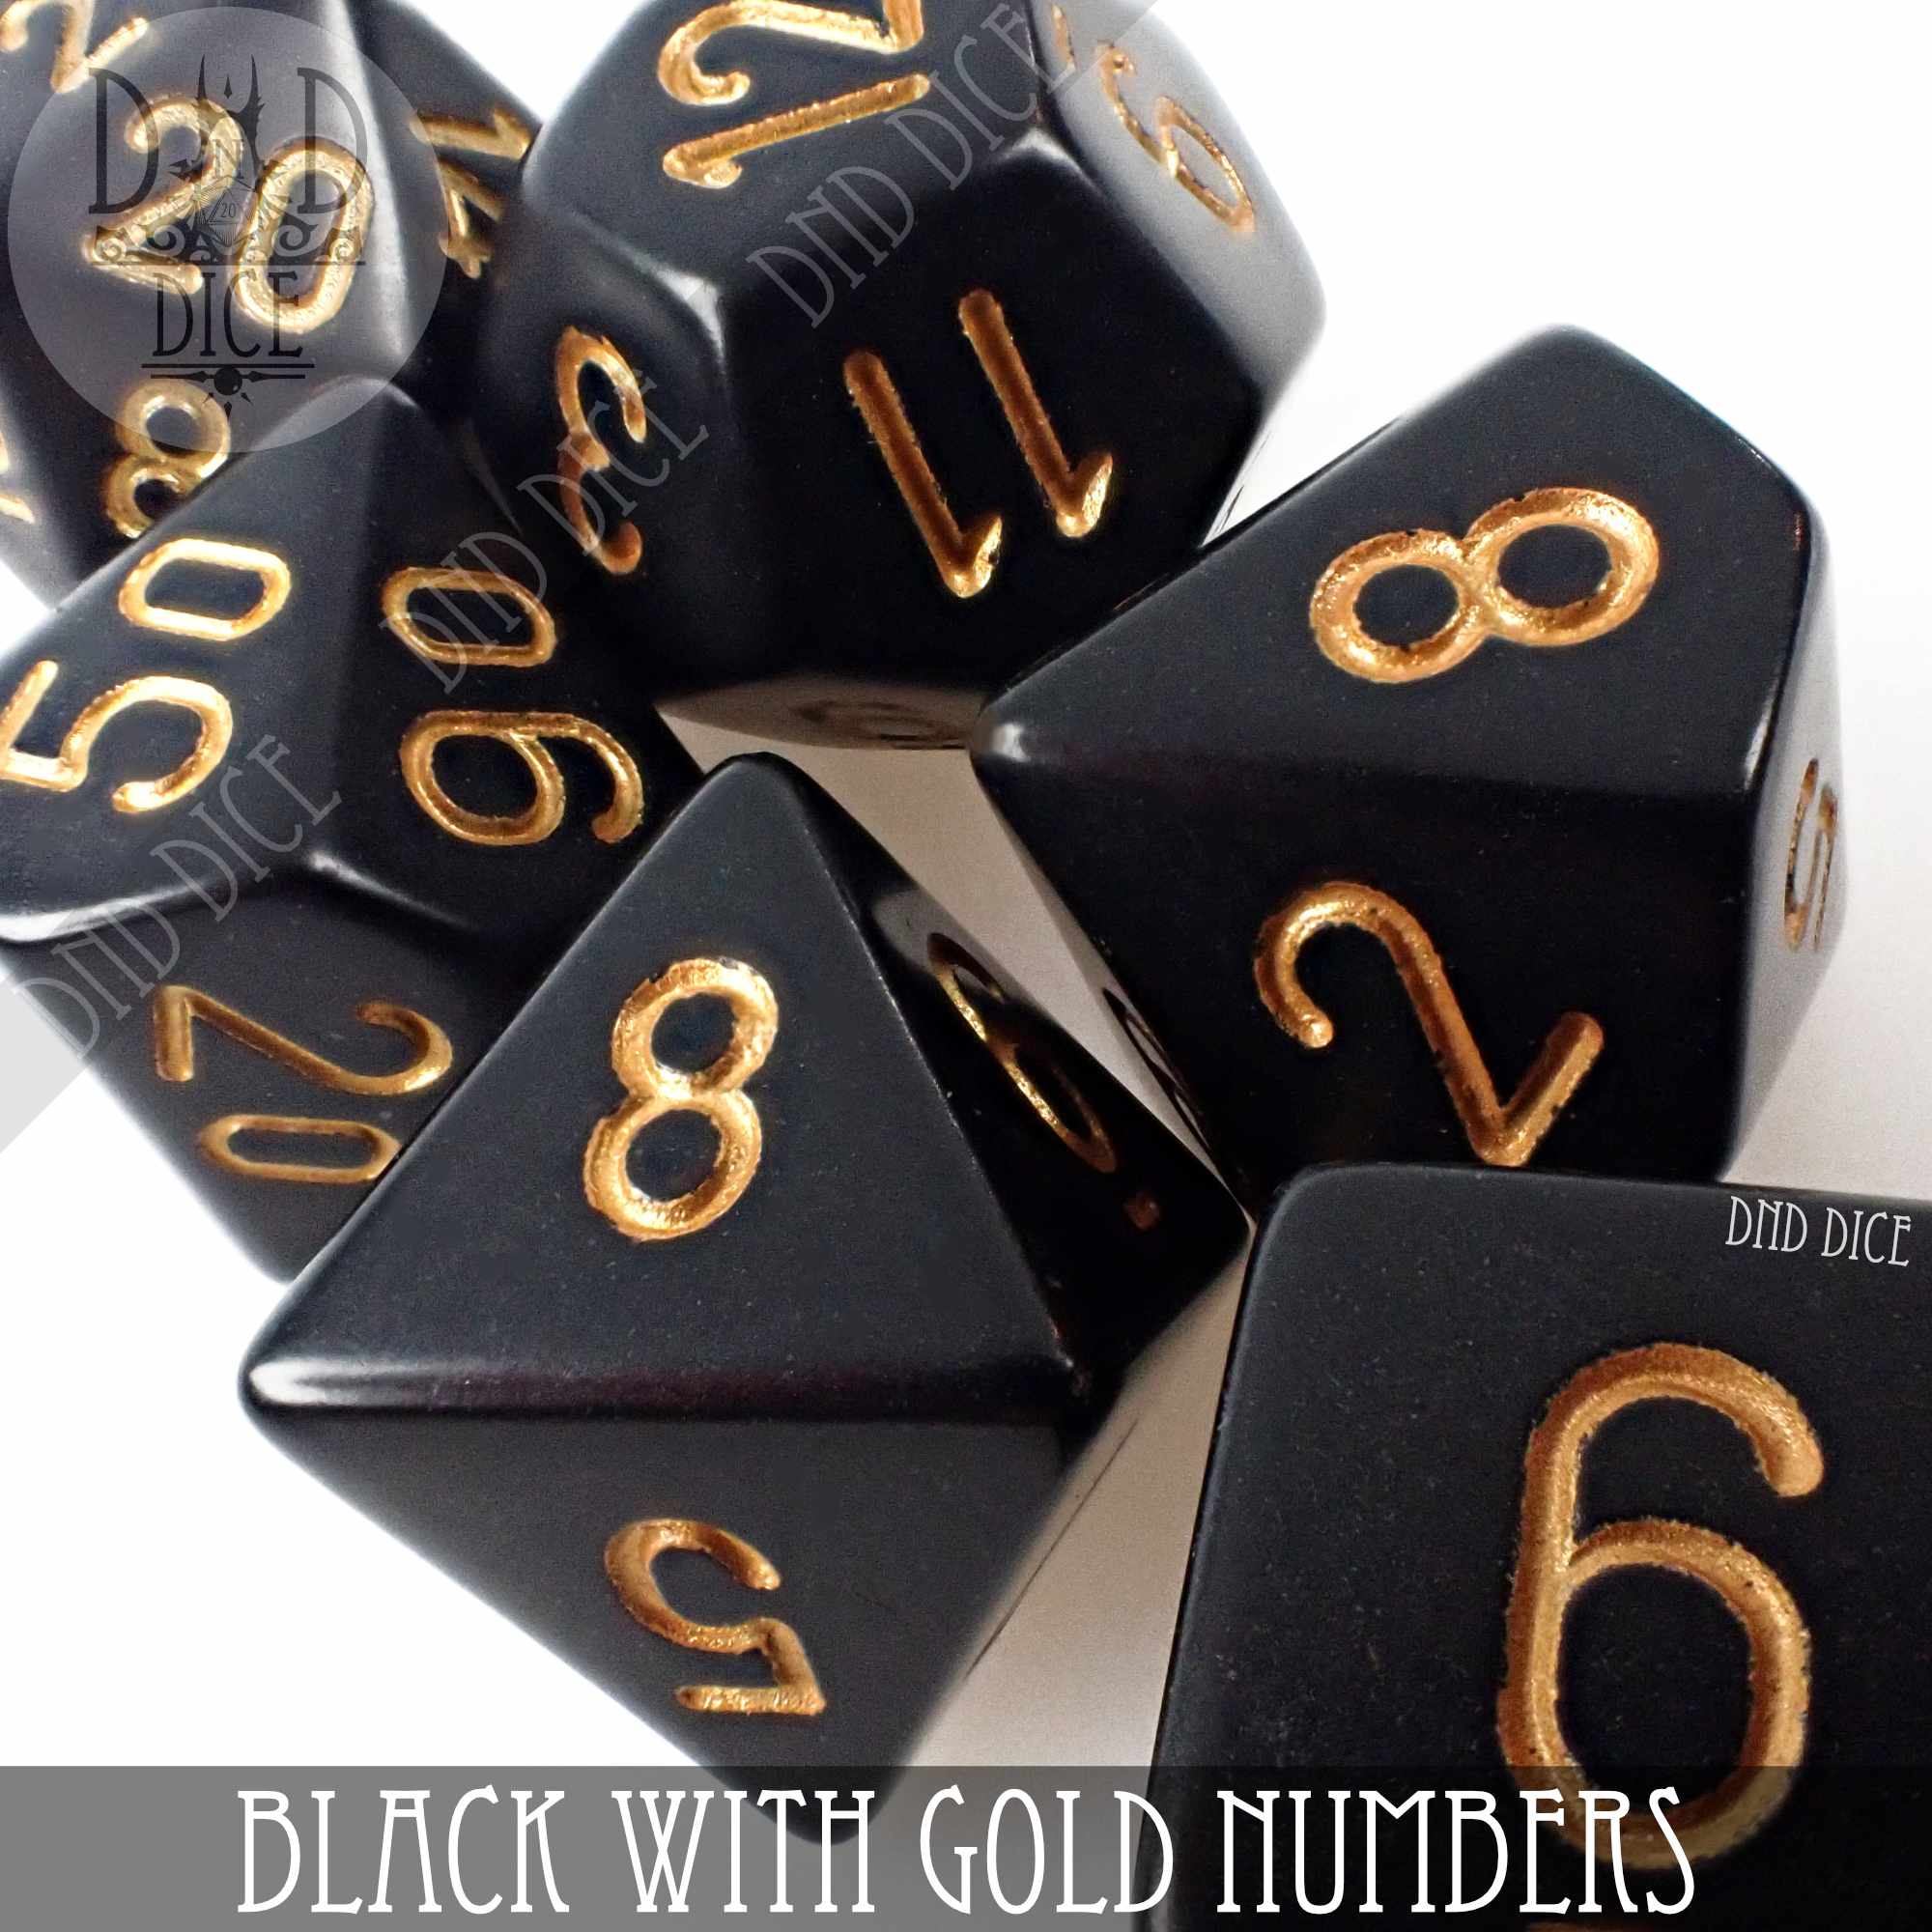 Black with Gold Numbers Build Your Own Set